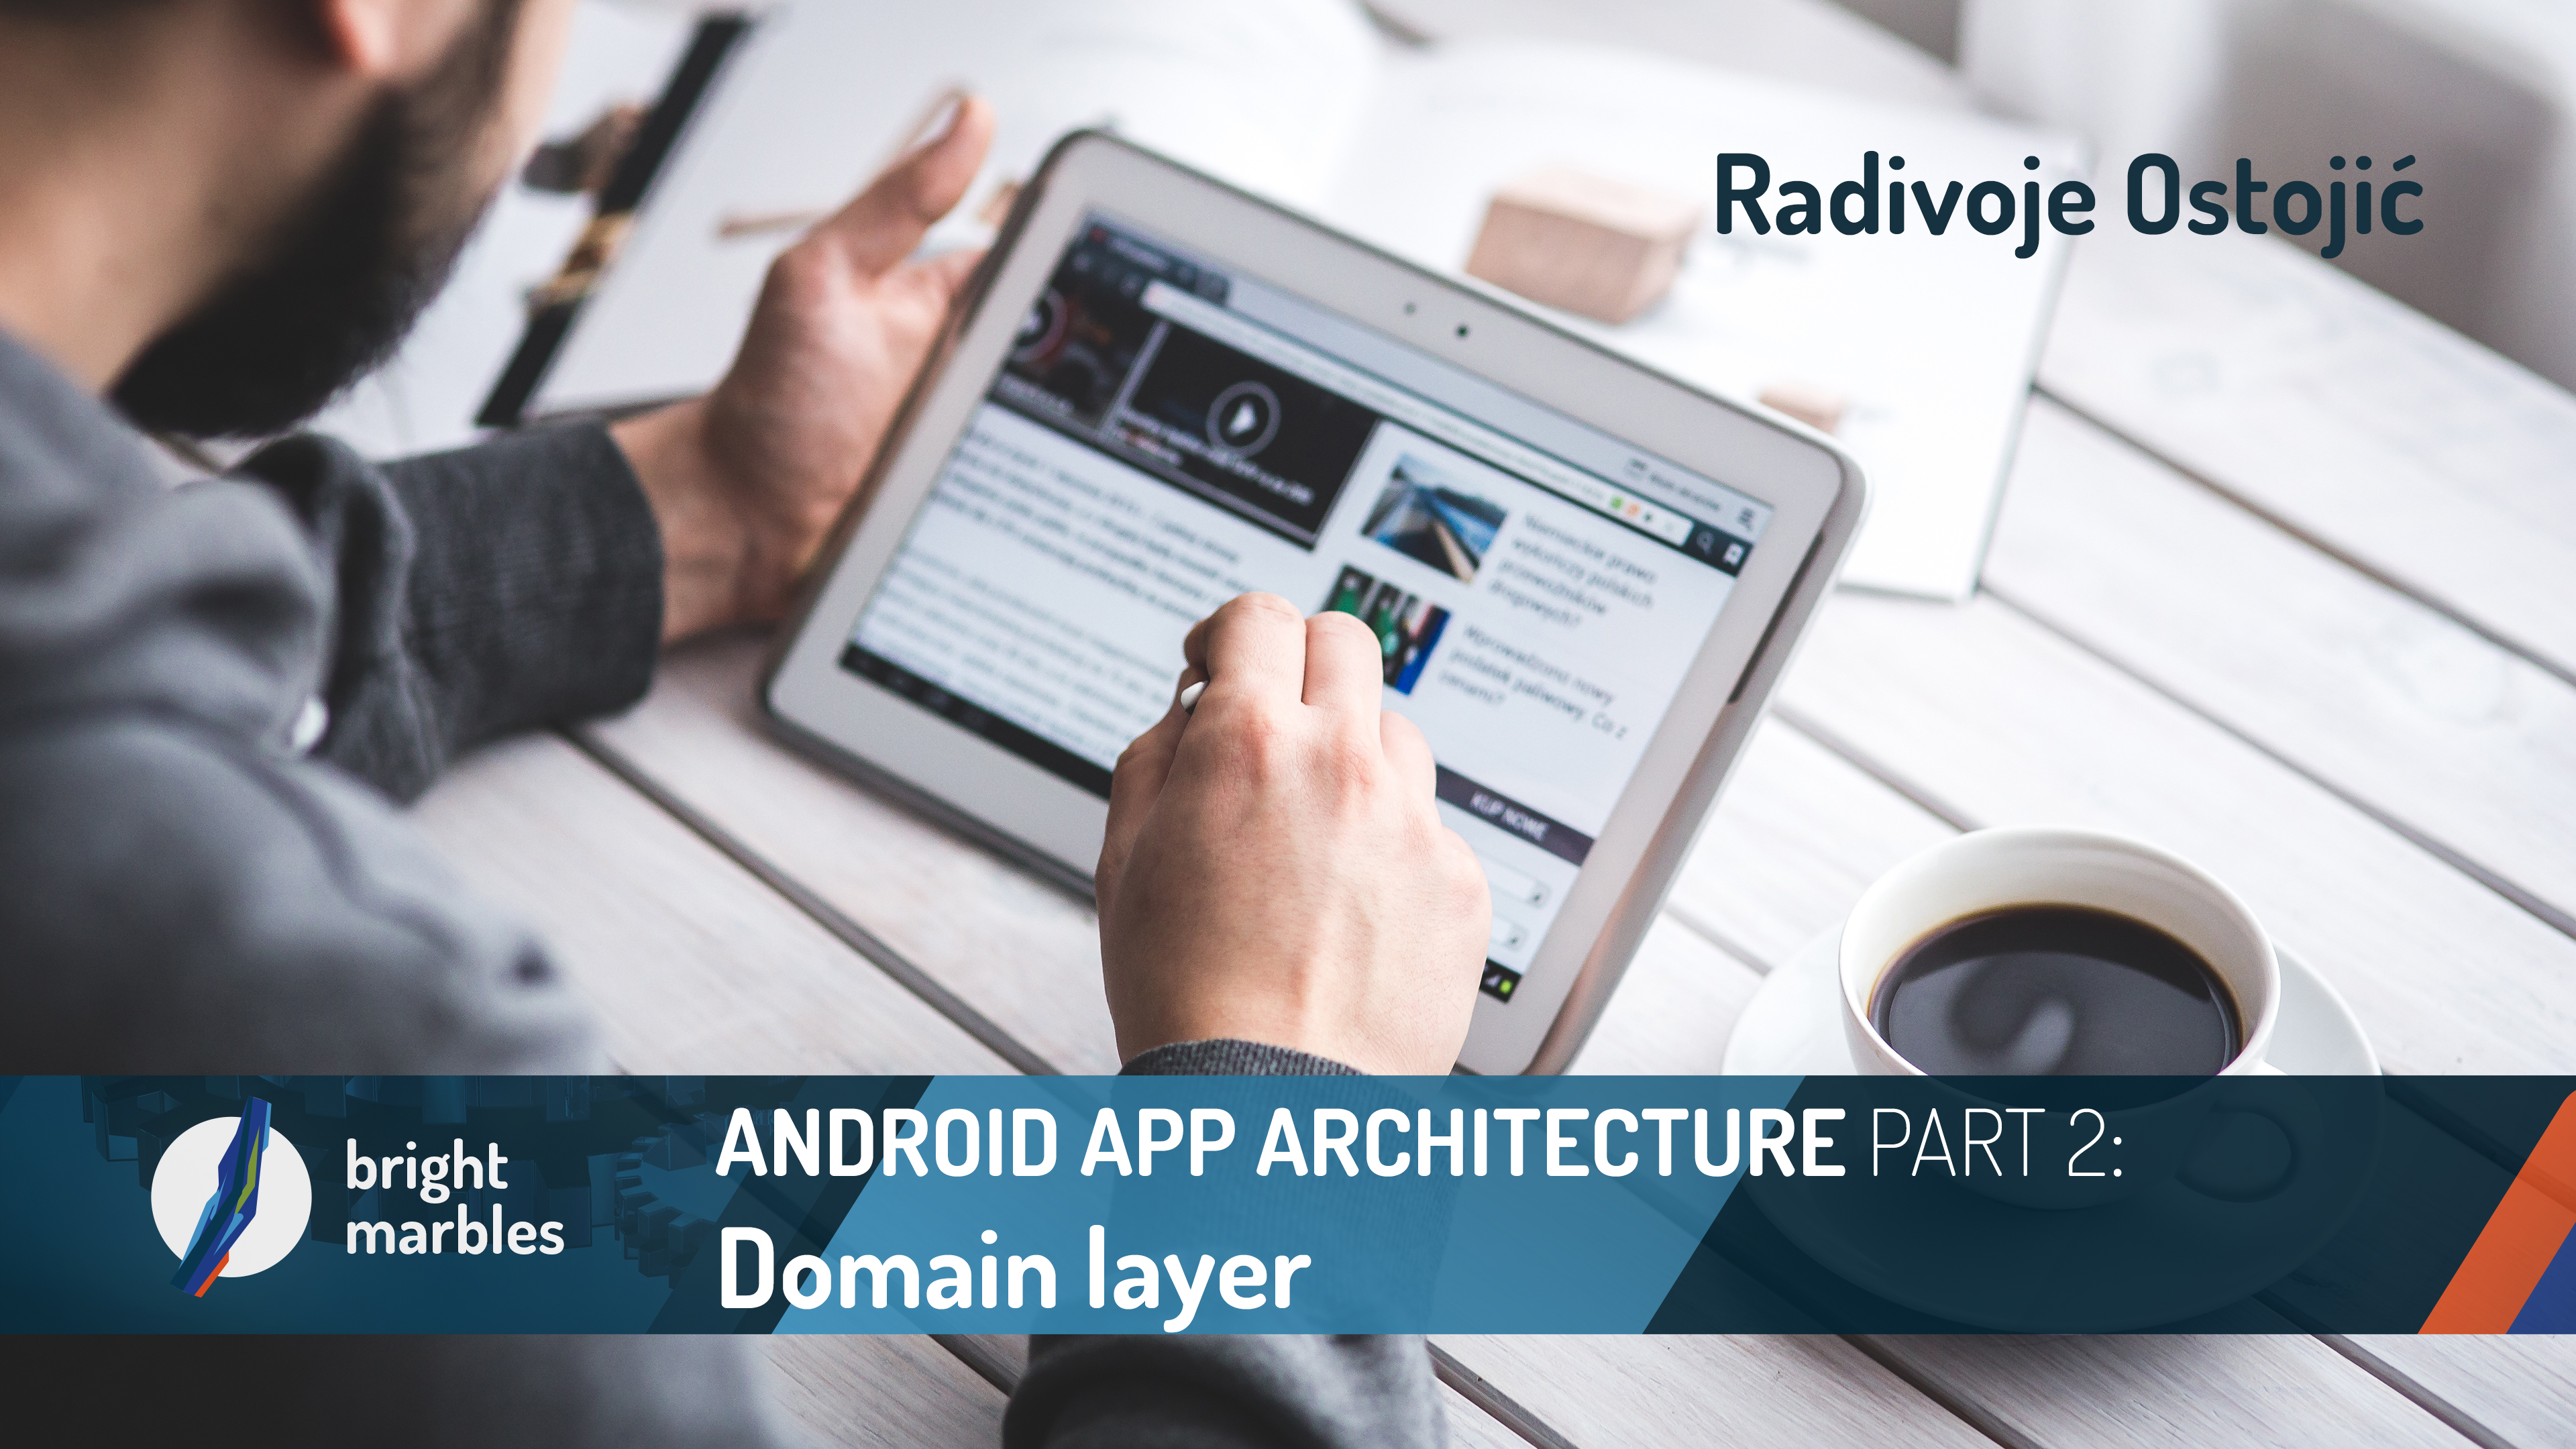 Android app architecture part 2